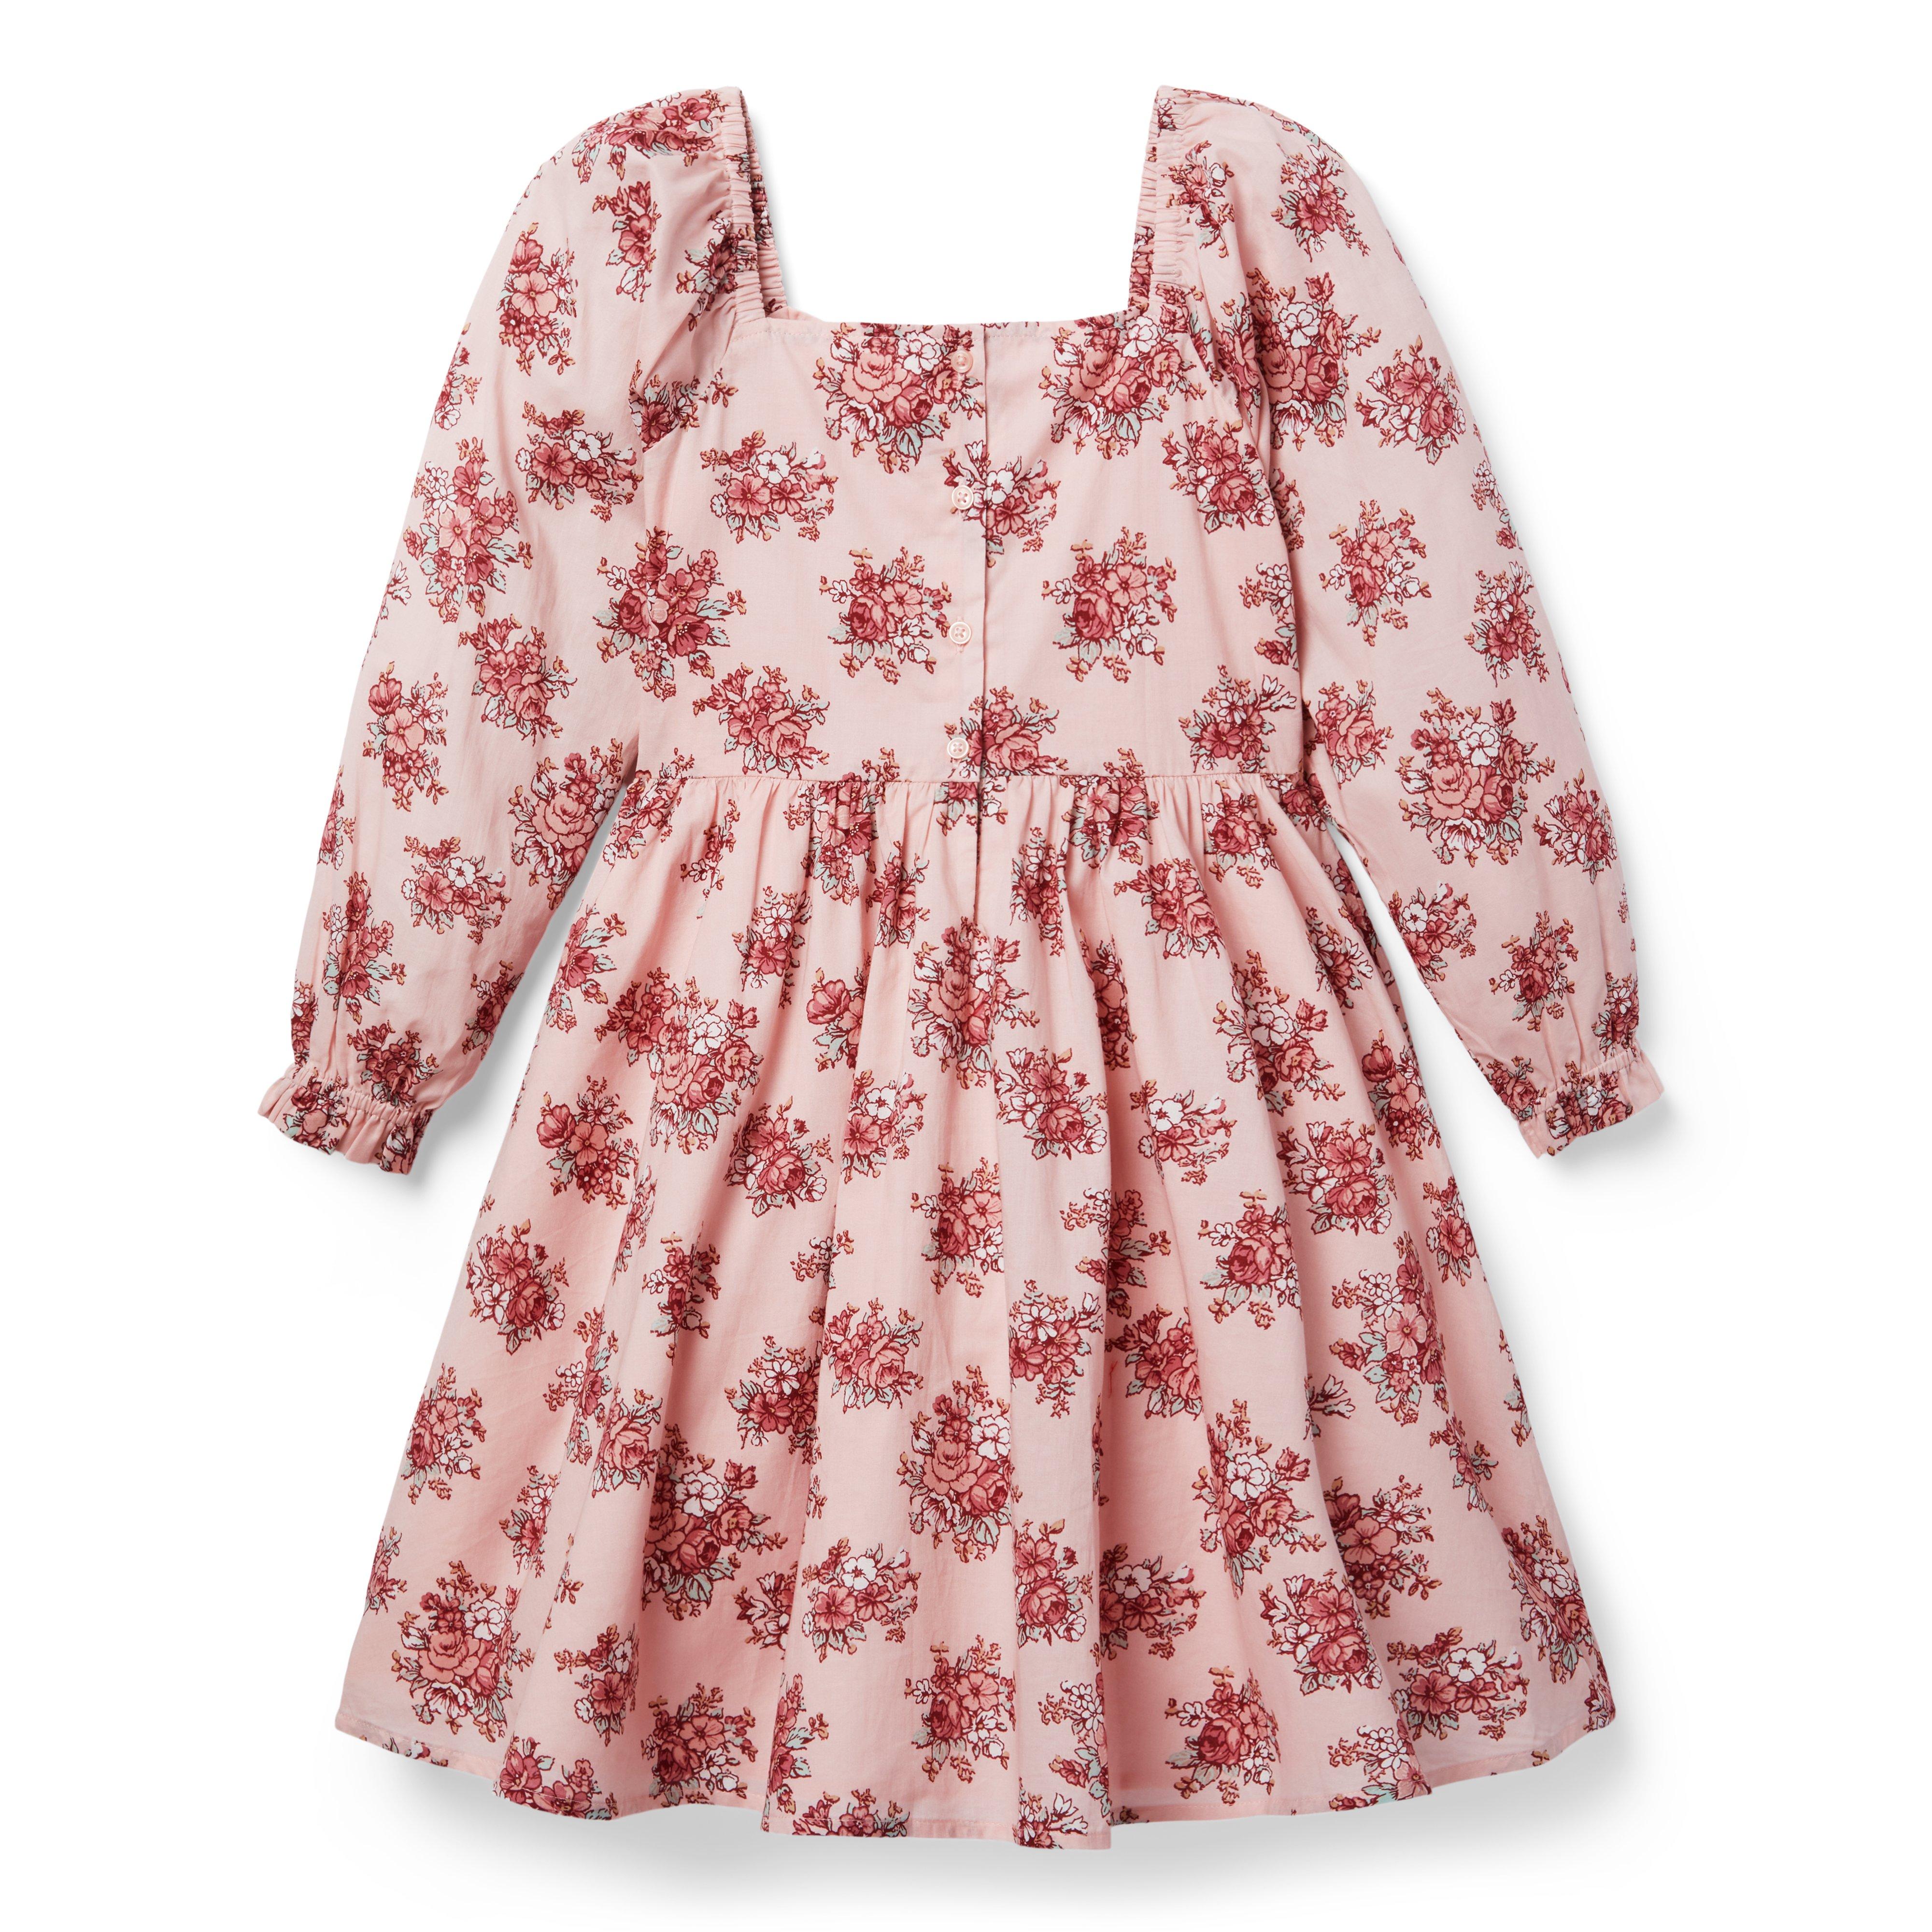 Tween Peachskin Floral Floral Sweetheart Dress by Janie and Jack